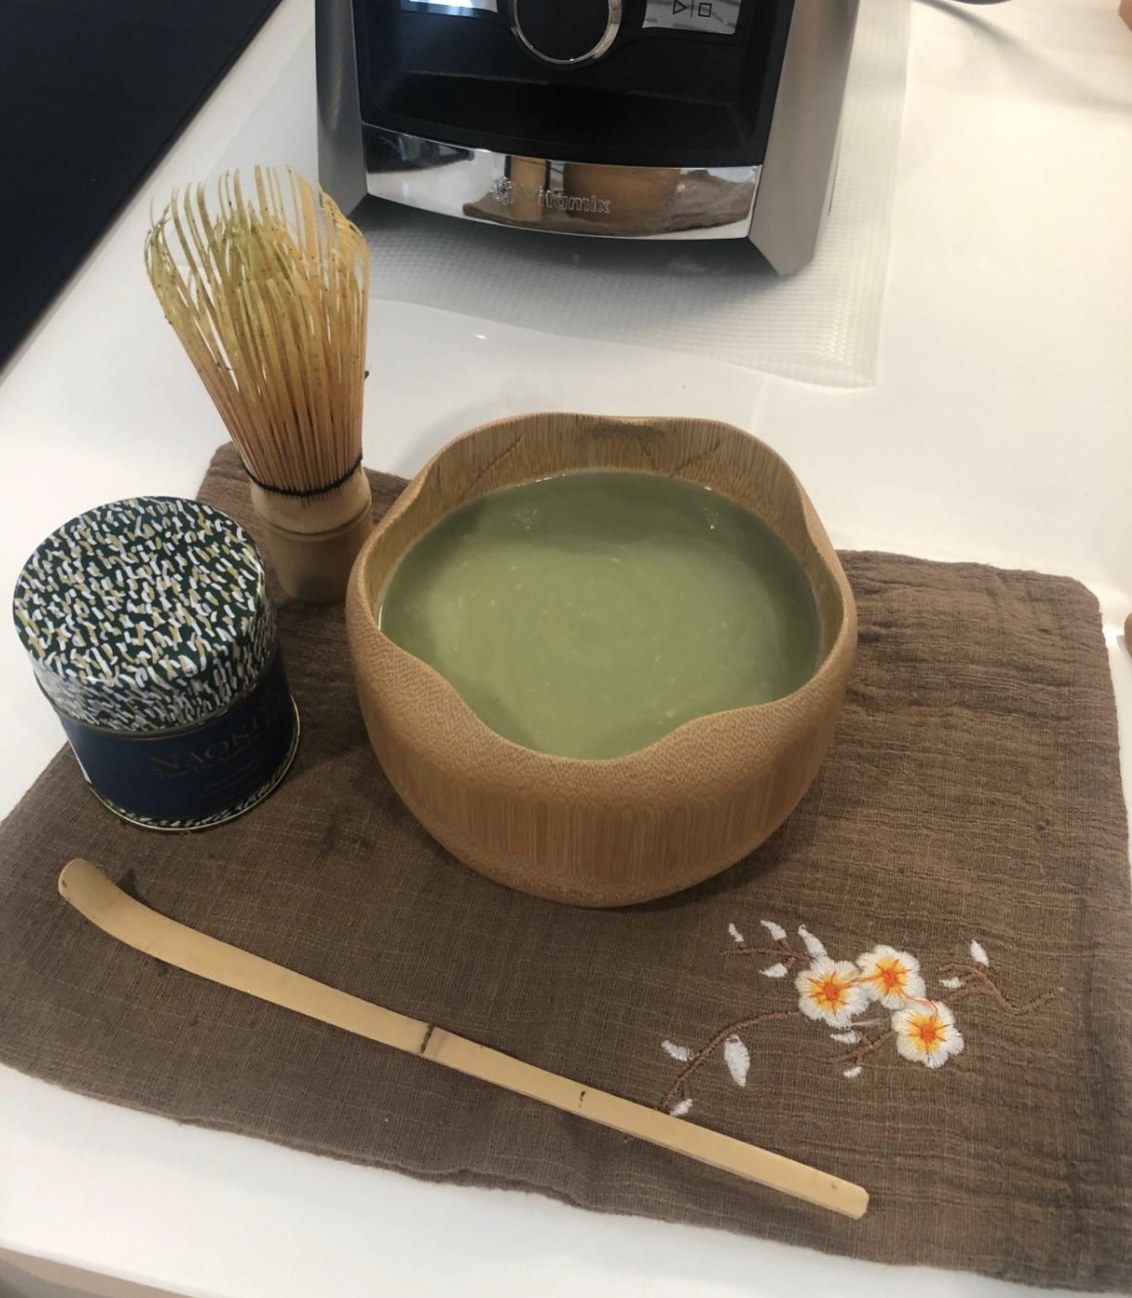 the tea set with matcha in the bowl